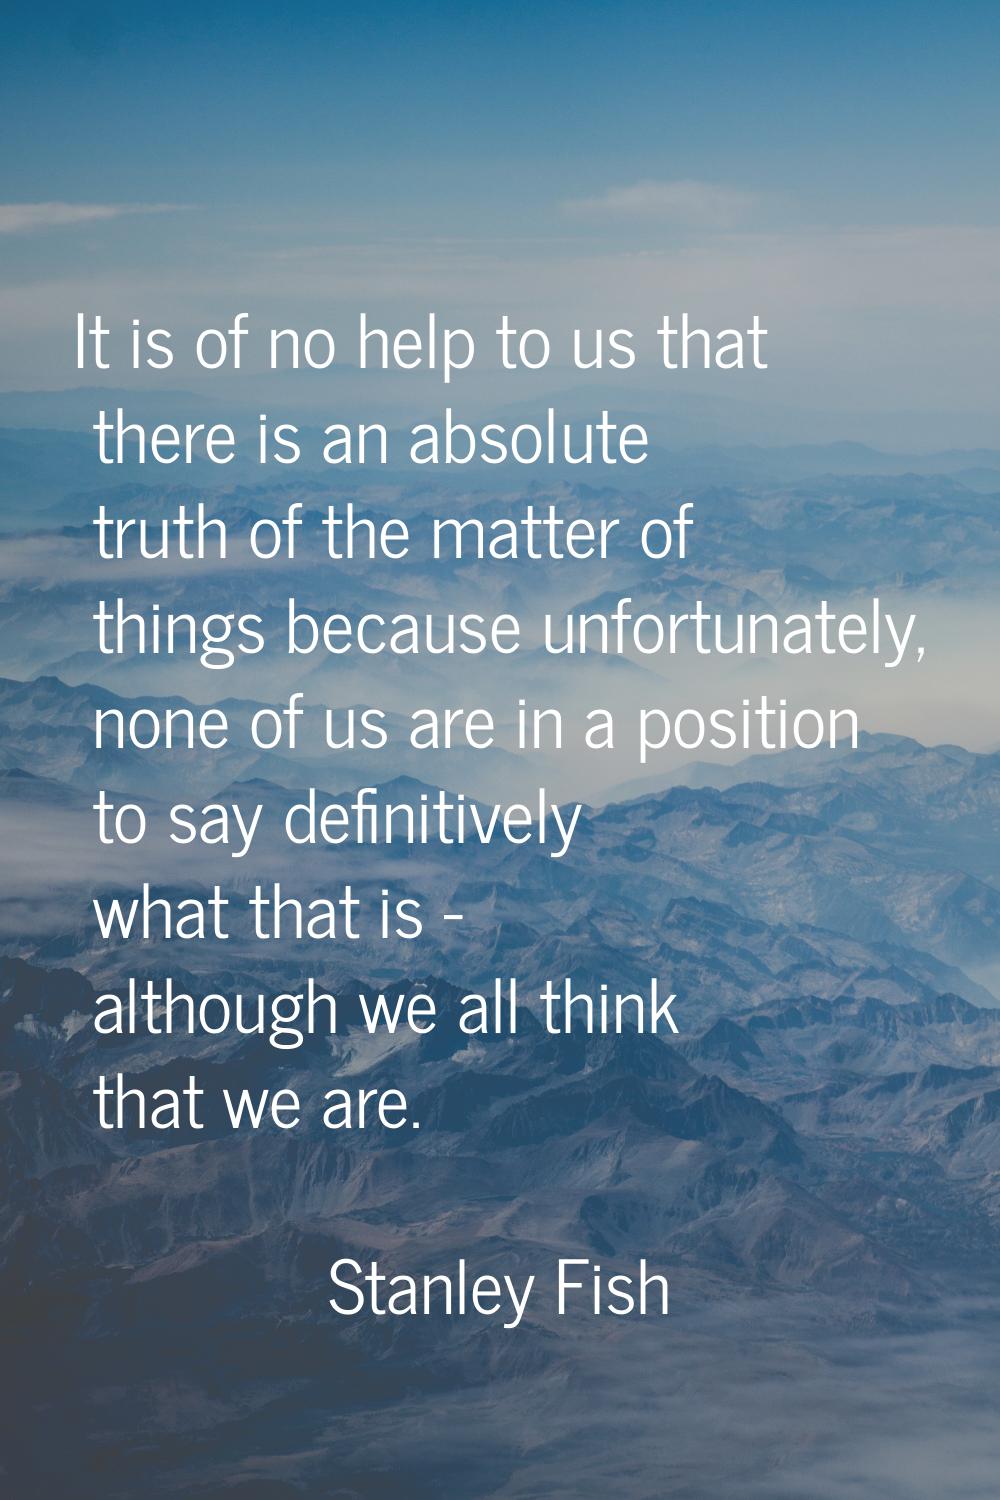 It is of no help to us that there is an absolute truth of the matter of things because unfortunatel